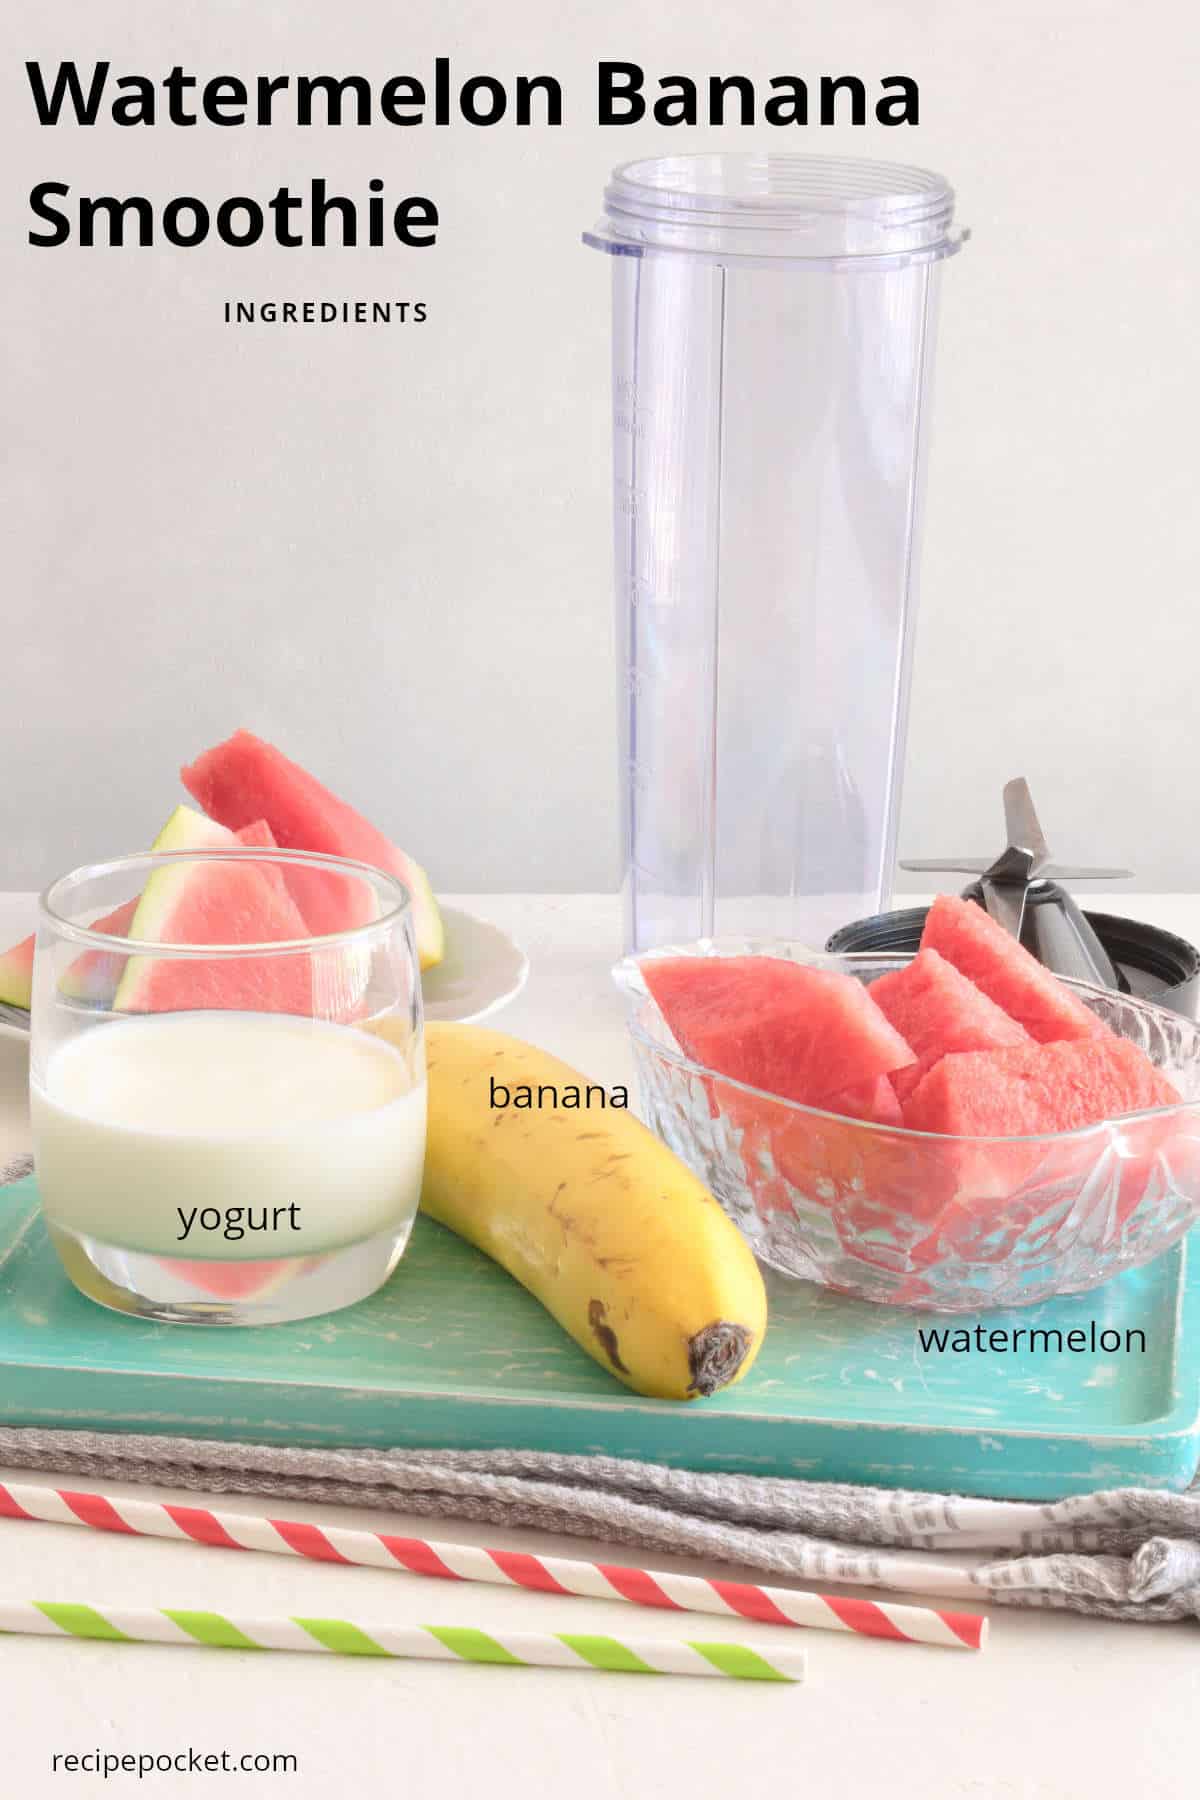 Image showing ingredients needed to make a watermelon banana smoothie.